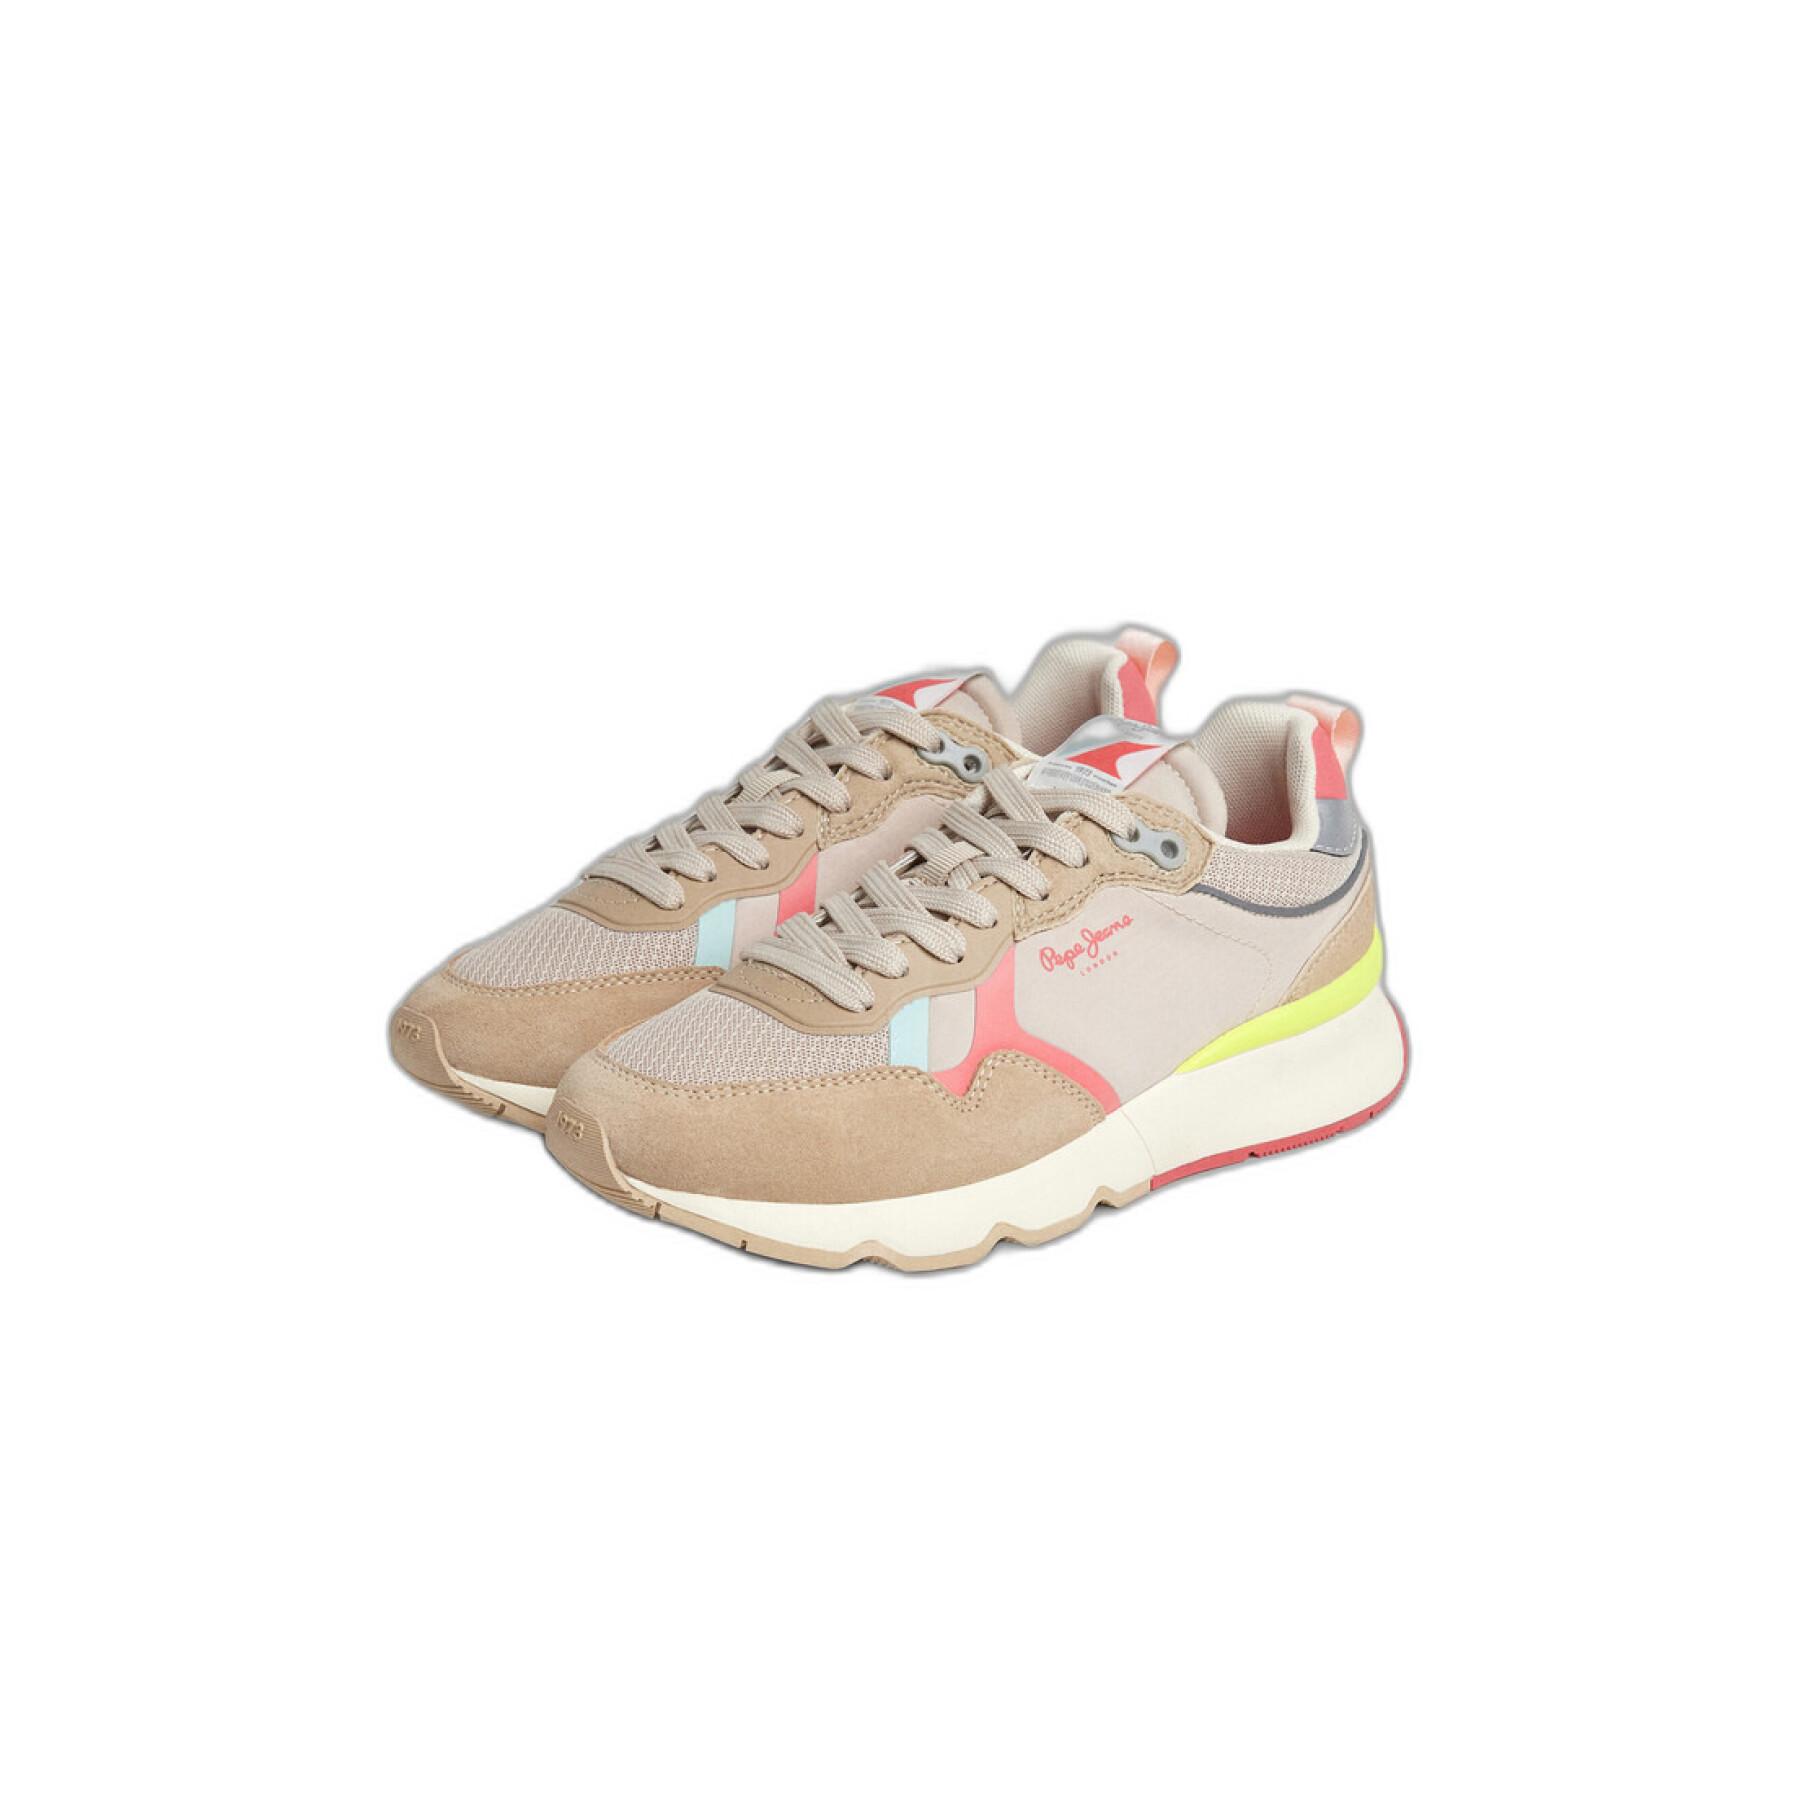 Women's sneakers Pepe Jeans Brit Pro Young